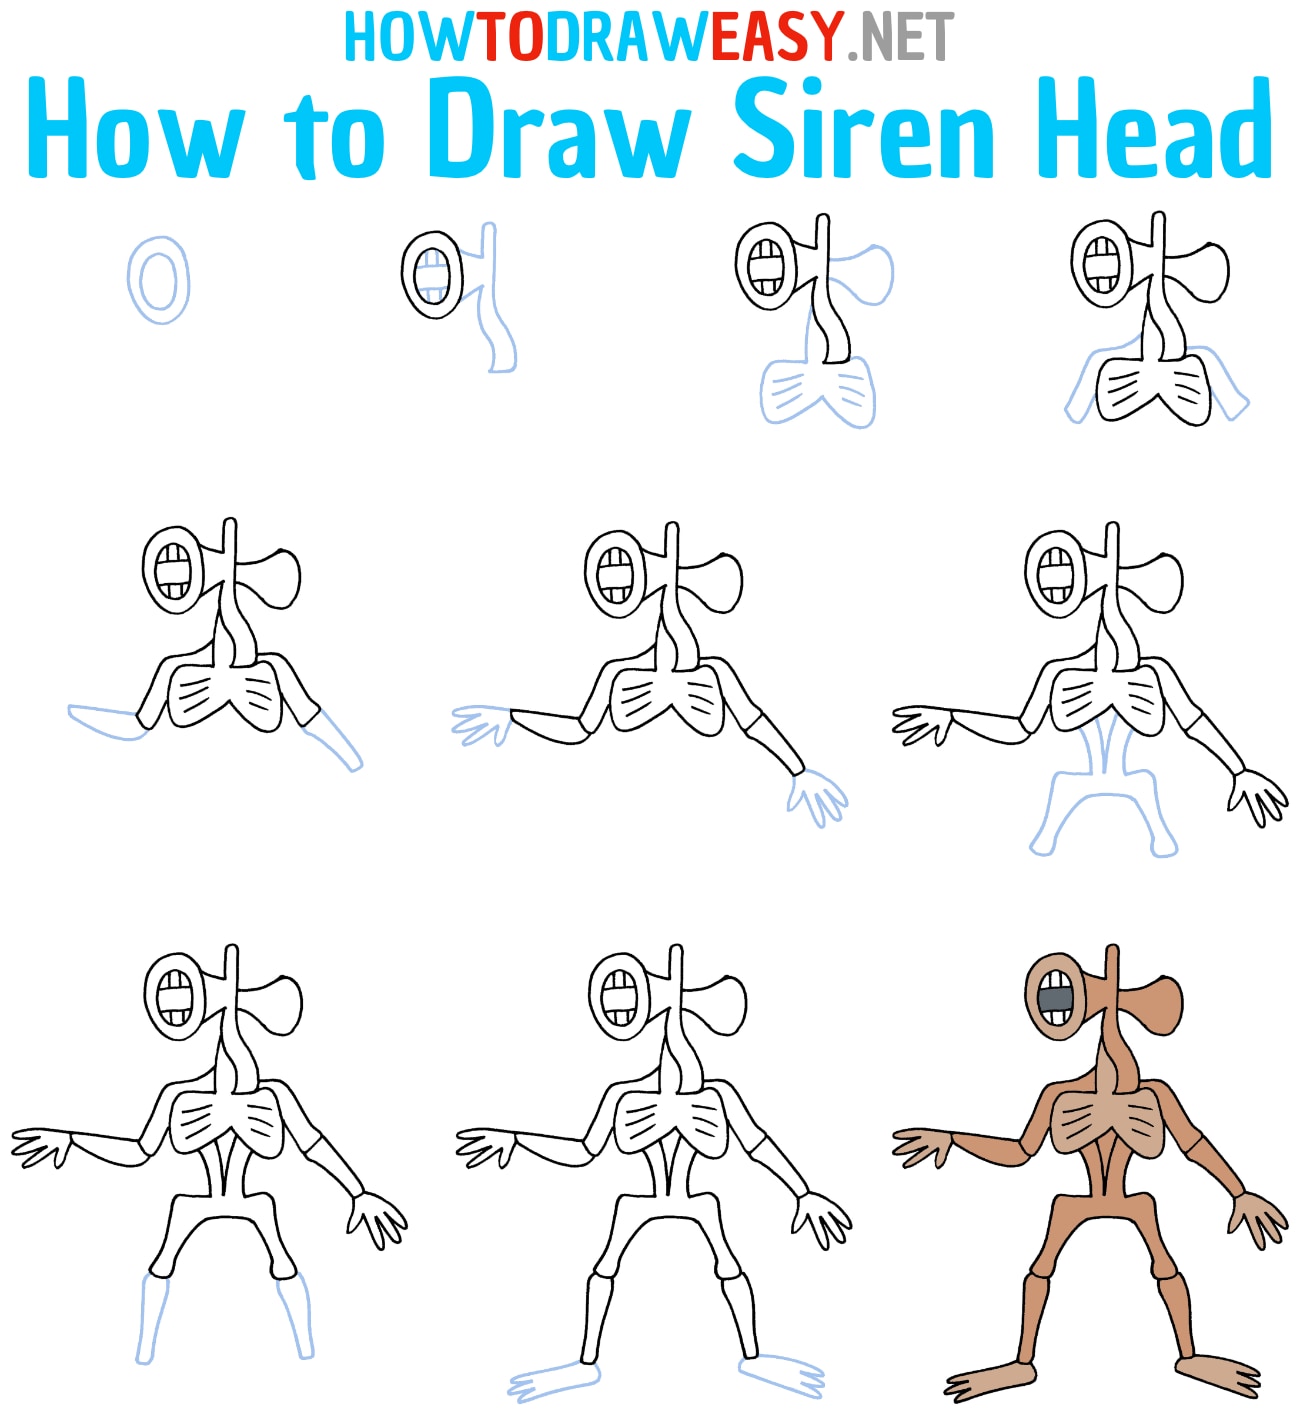 How to Draw Siren Head Step by Step